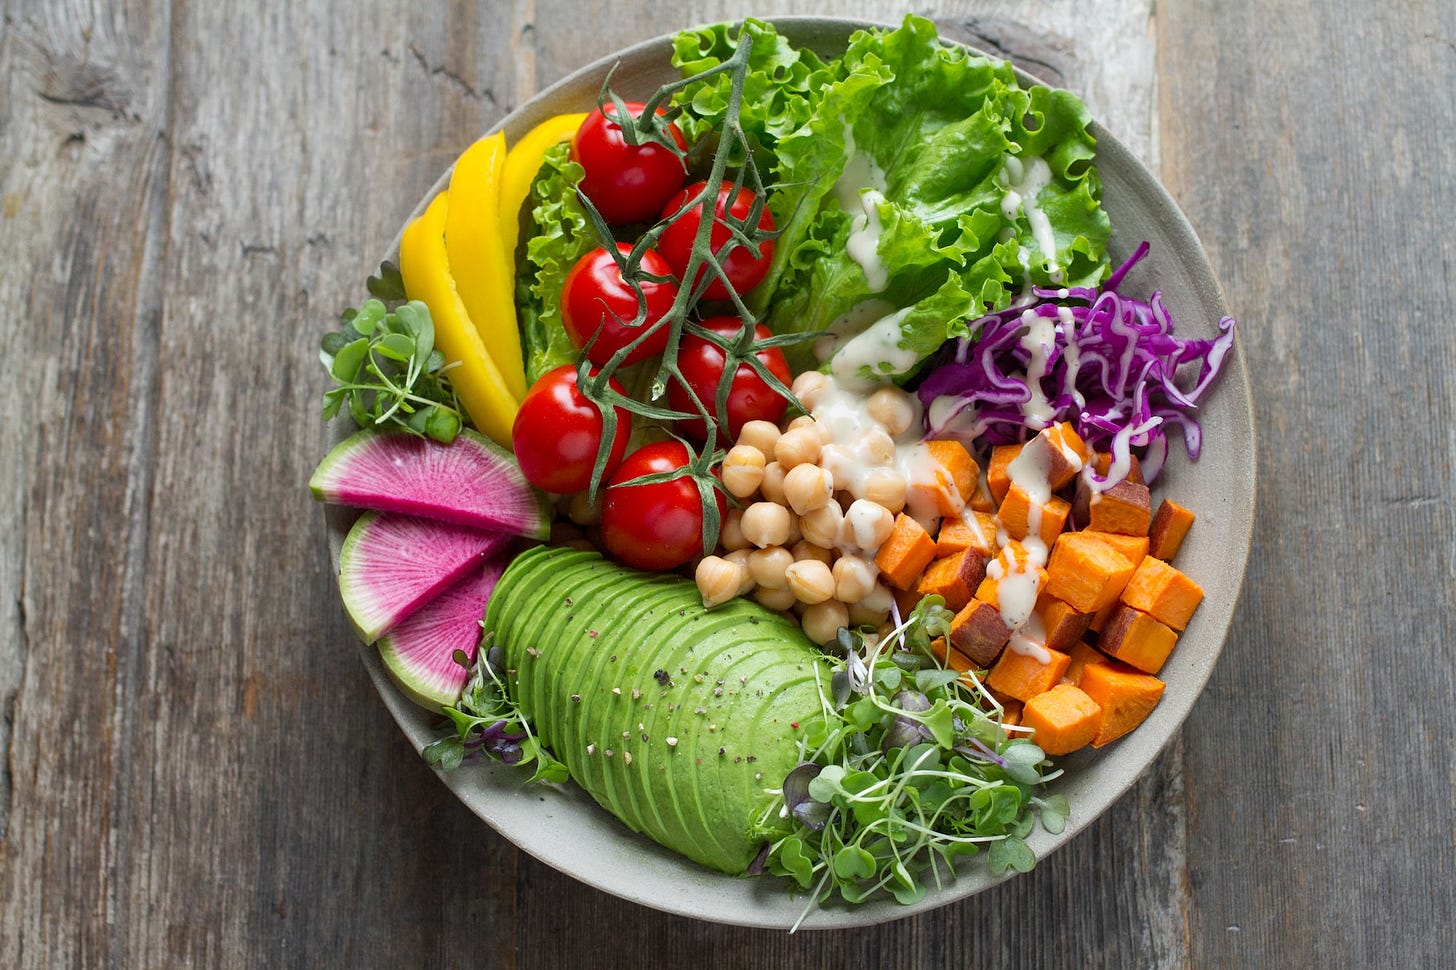 Vegan Nutrition 101: How to Get All the Nutrients You Need on a Plant-Based Diet